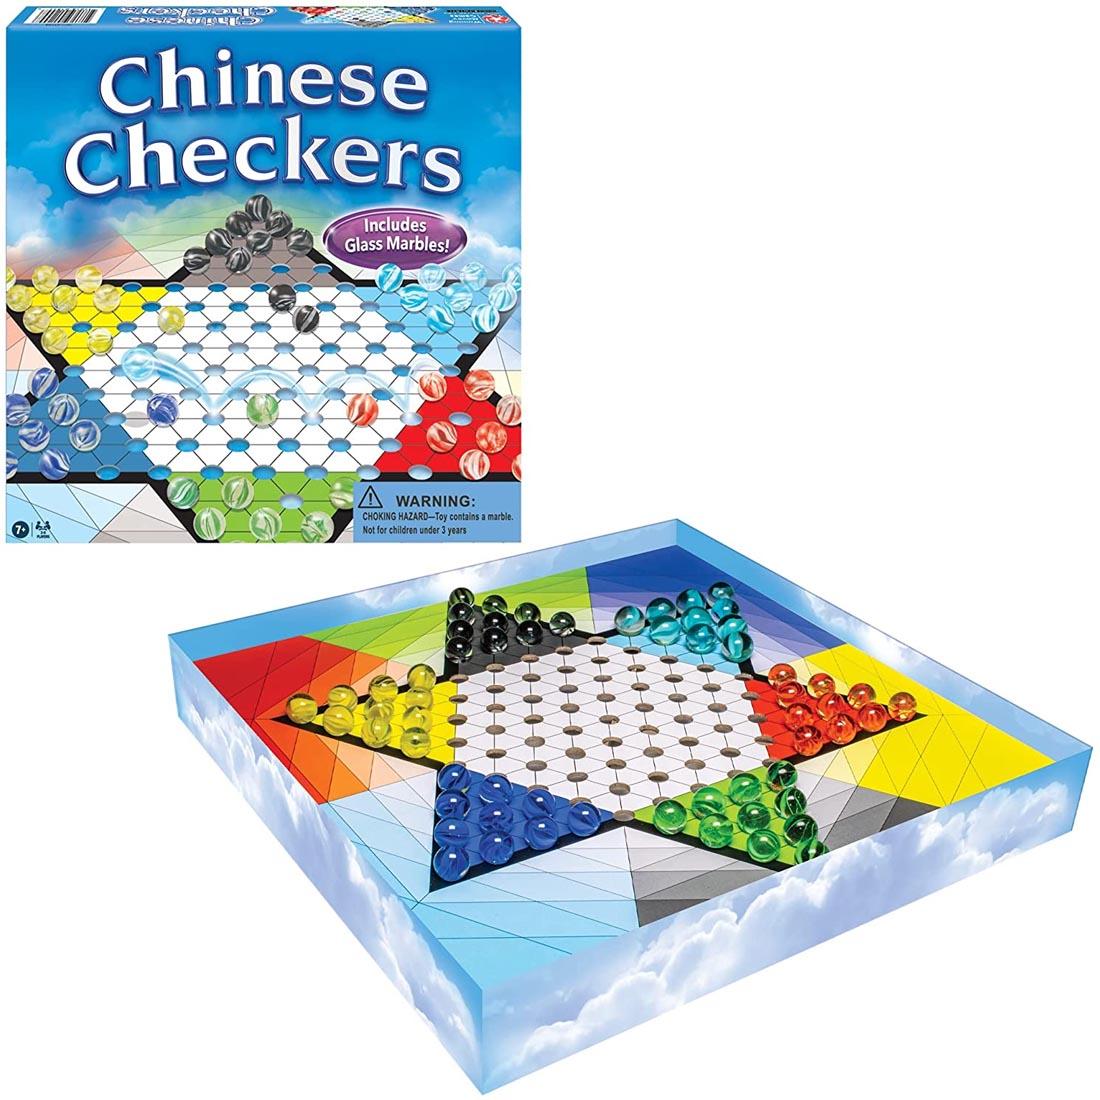 box and contents of Chinese Checkers